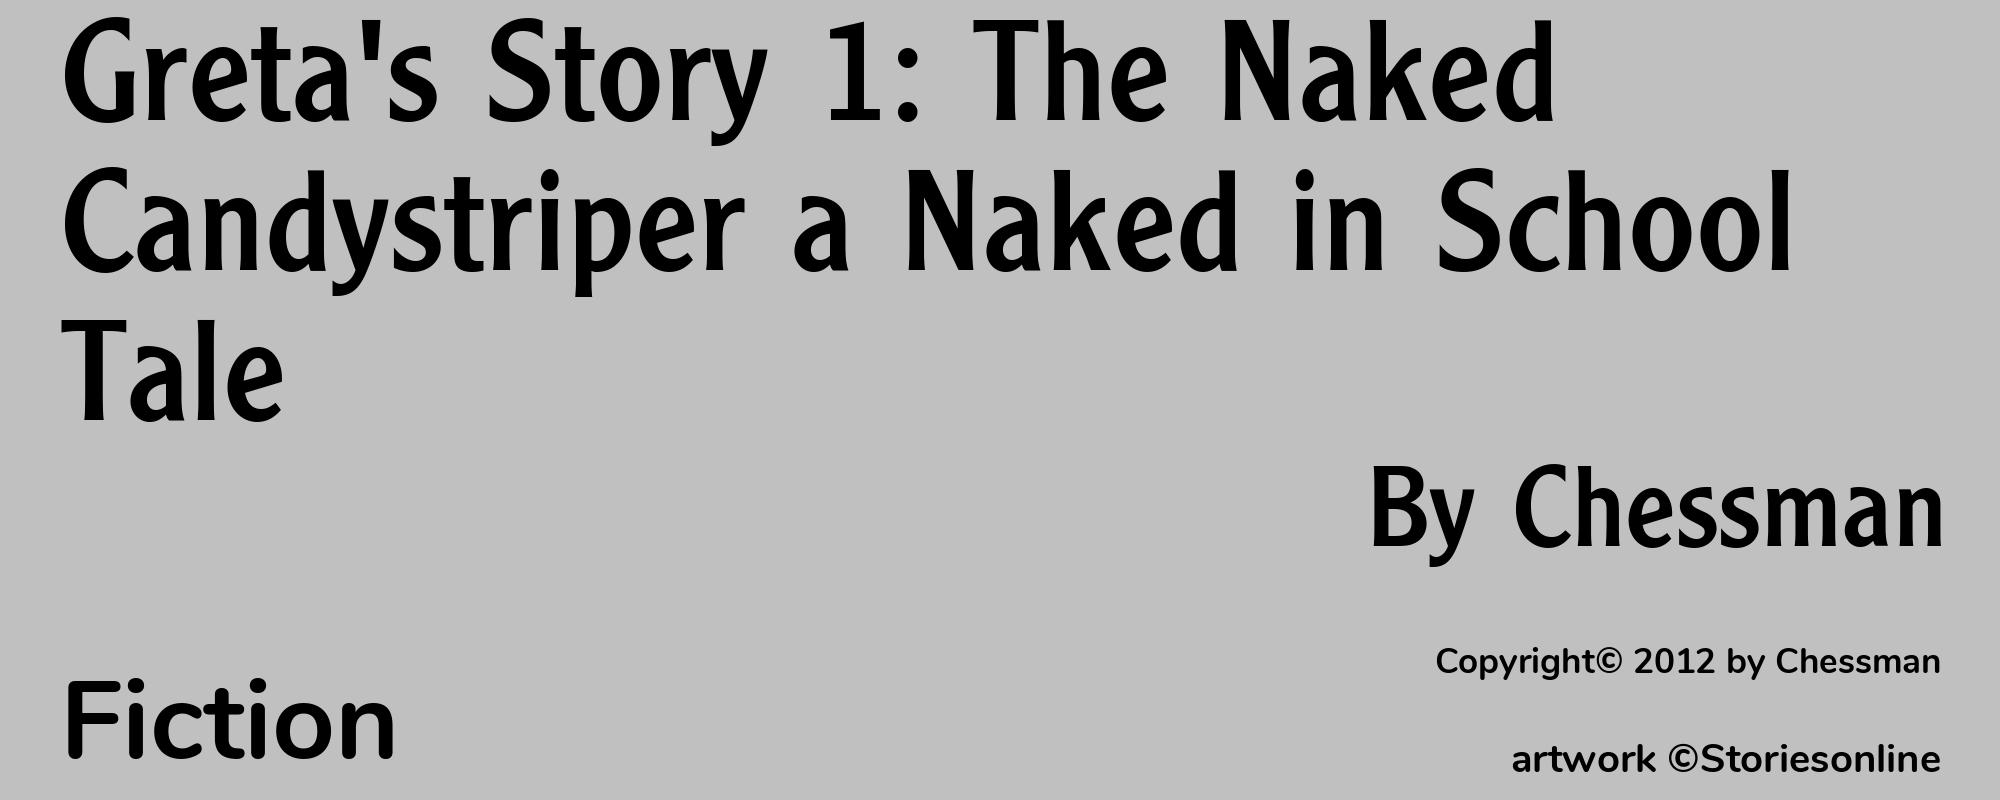 Greta's Story 1: The Naked Candystriper a Naked in School Tale - Cover